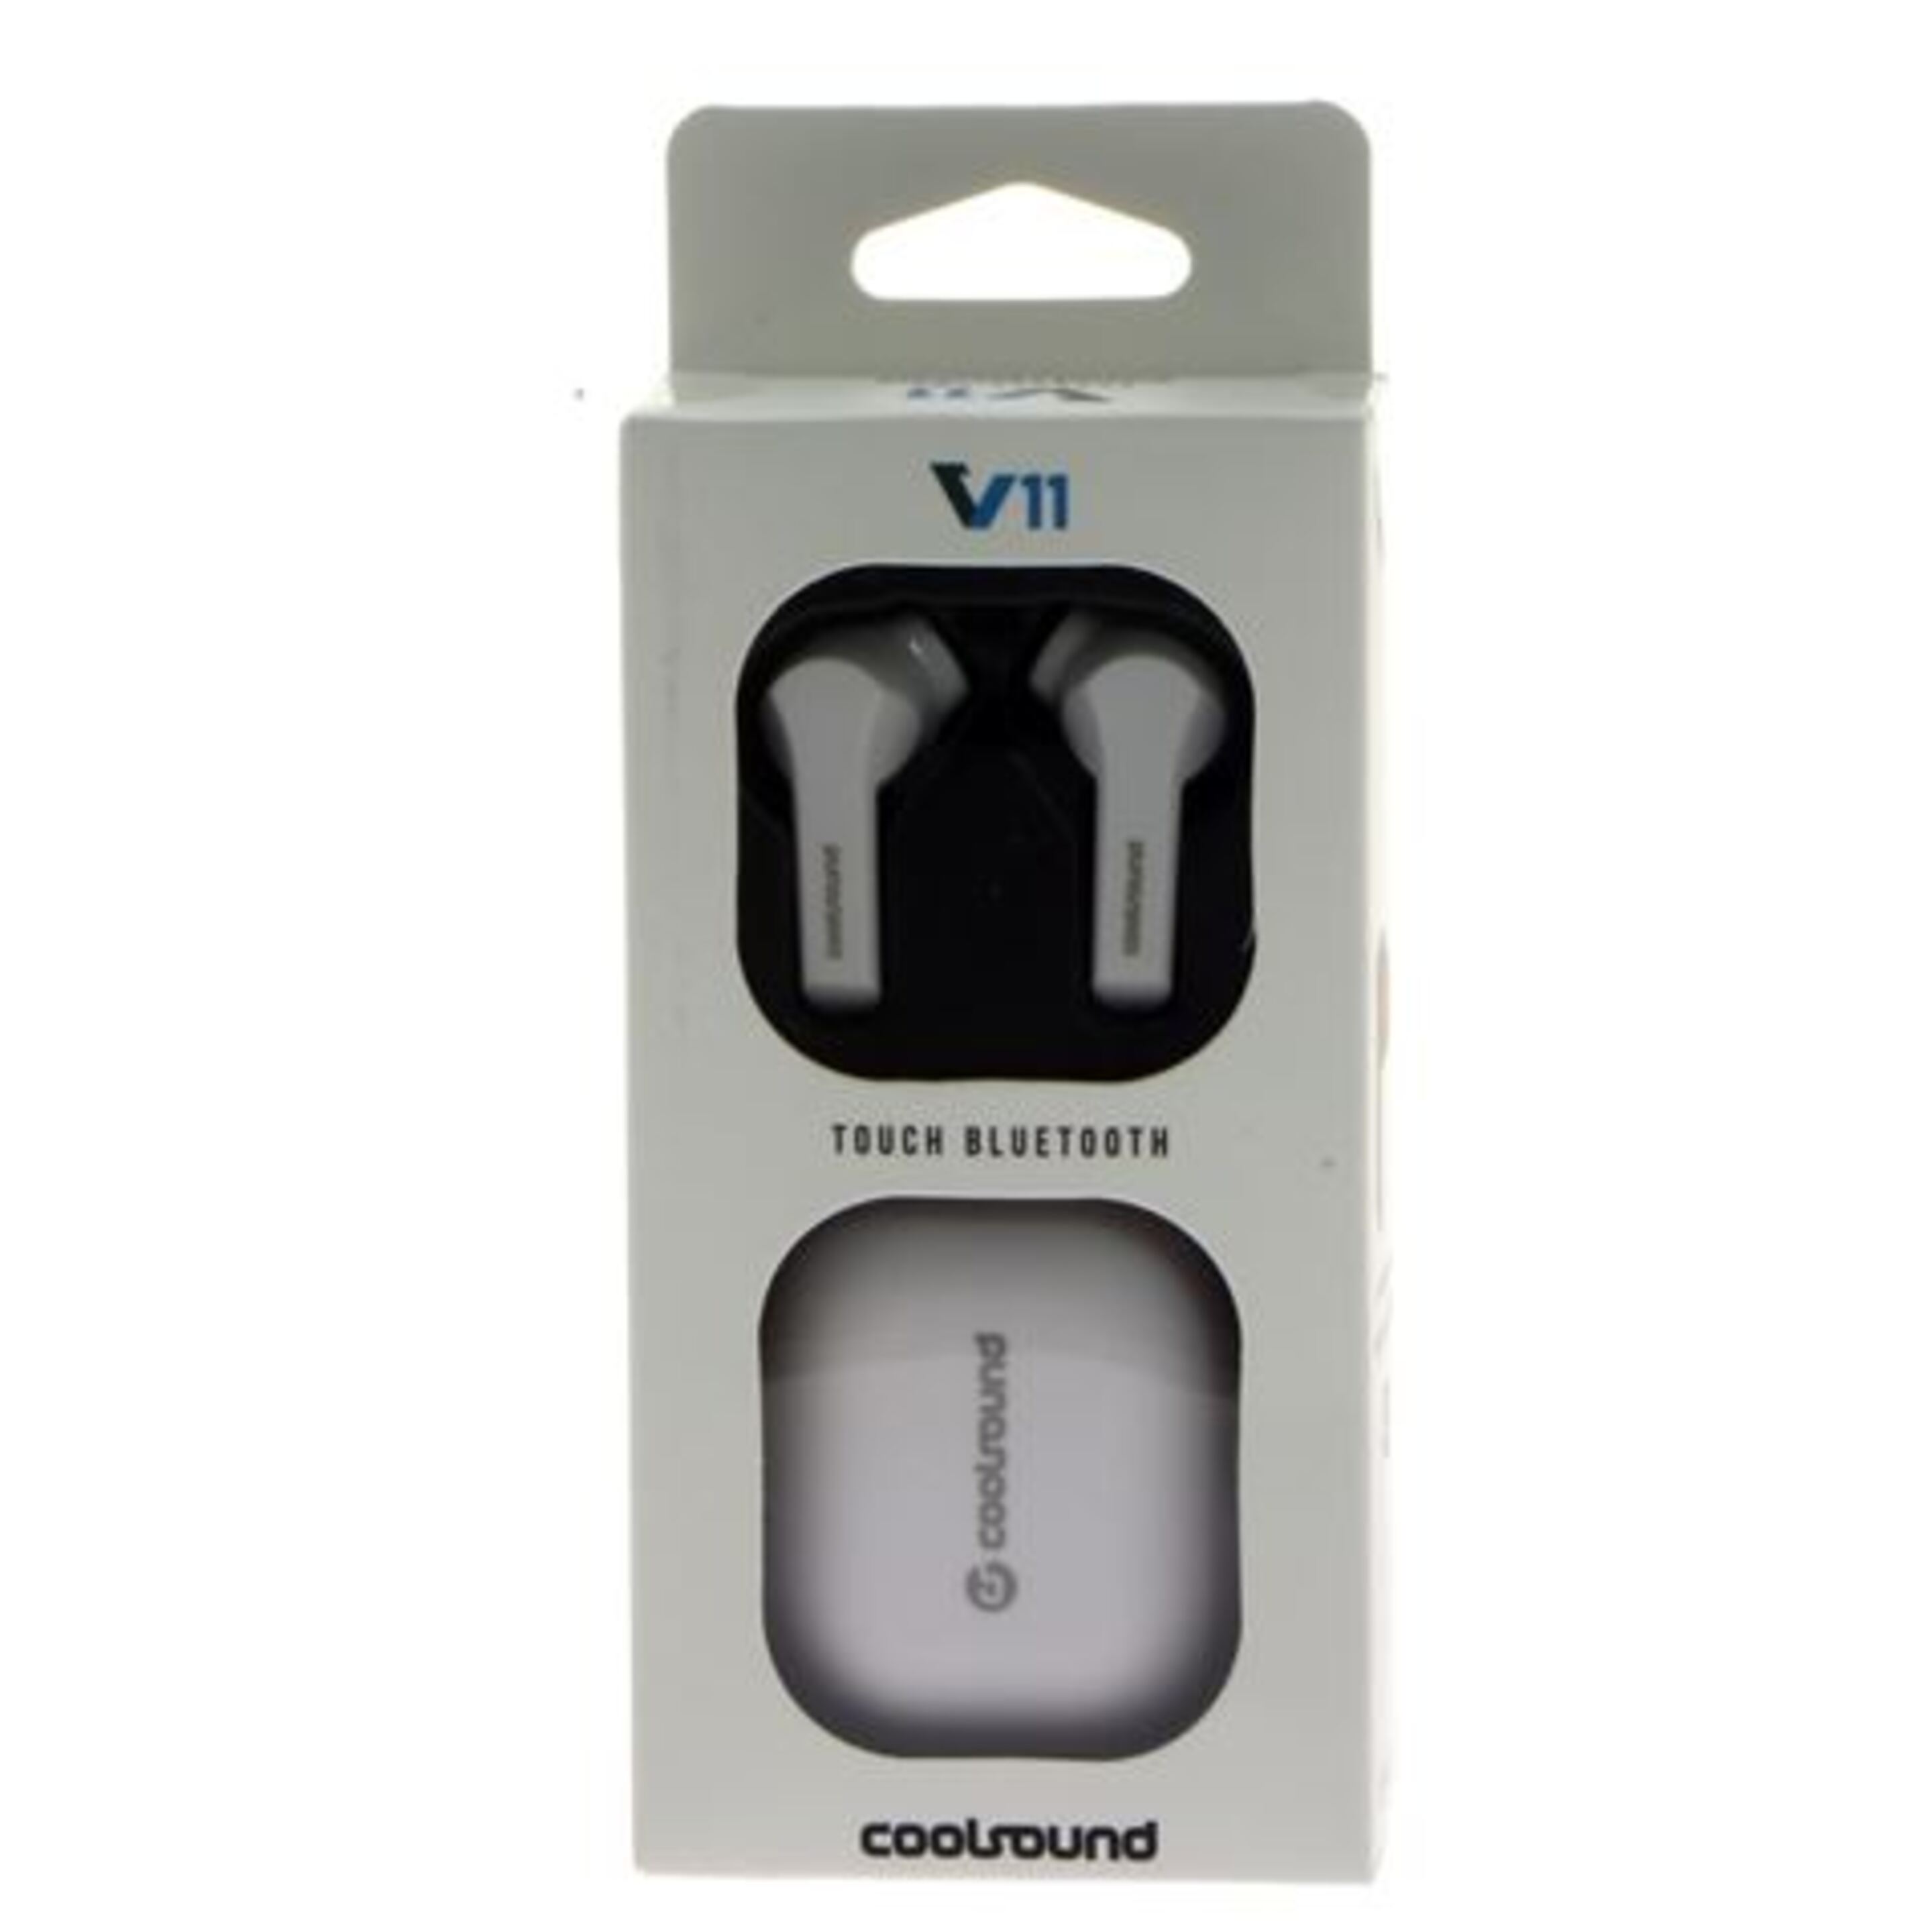 Auriculares Earbuds Tws V11 Touch Bluetooth 5.0 Coolsound Blanco